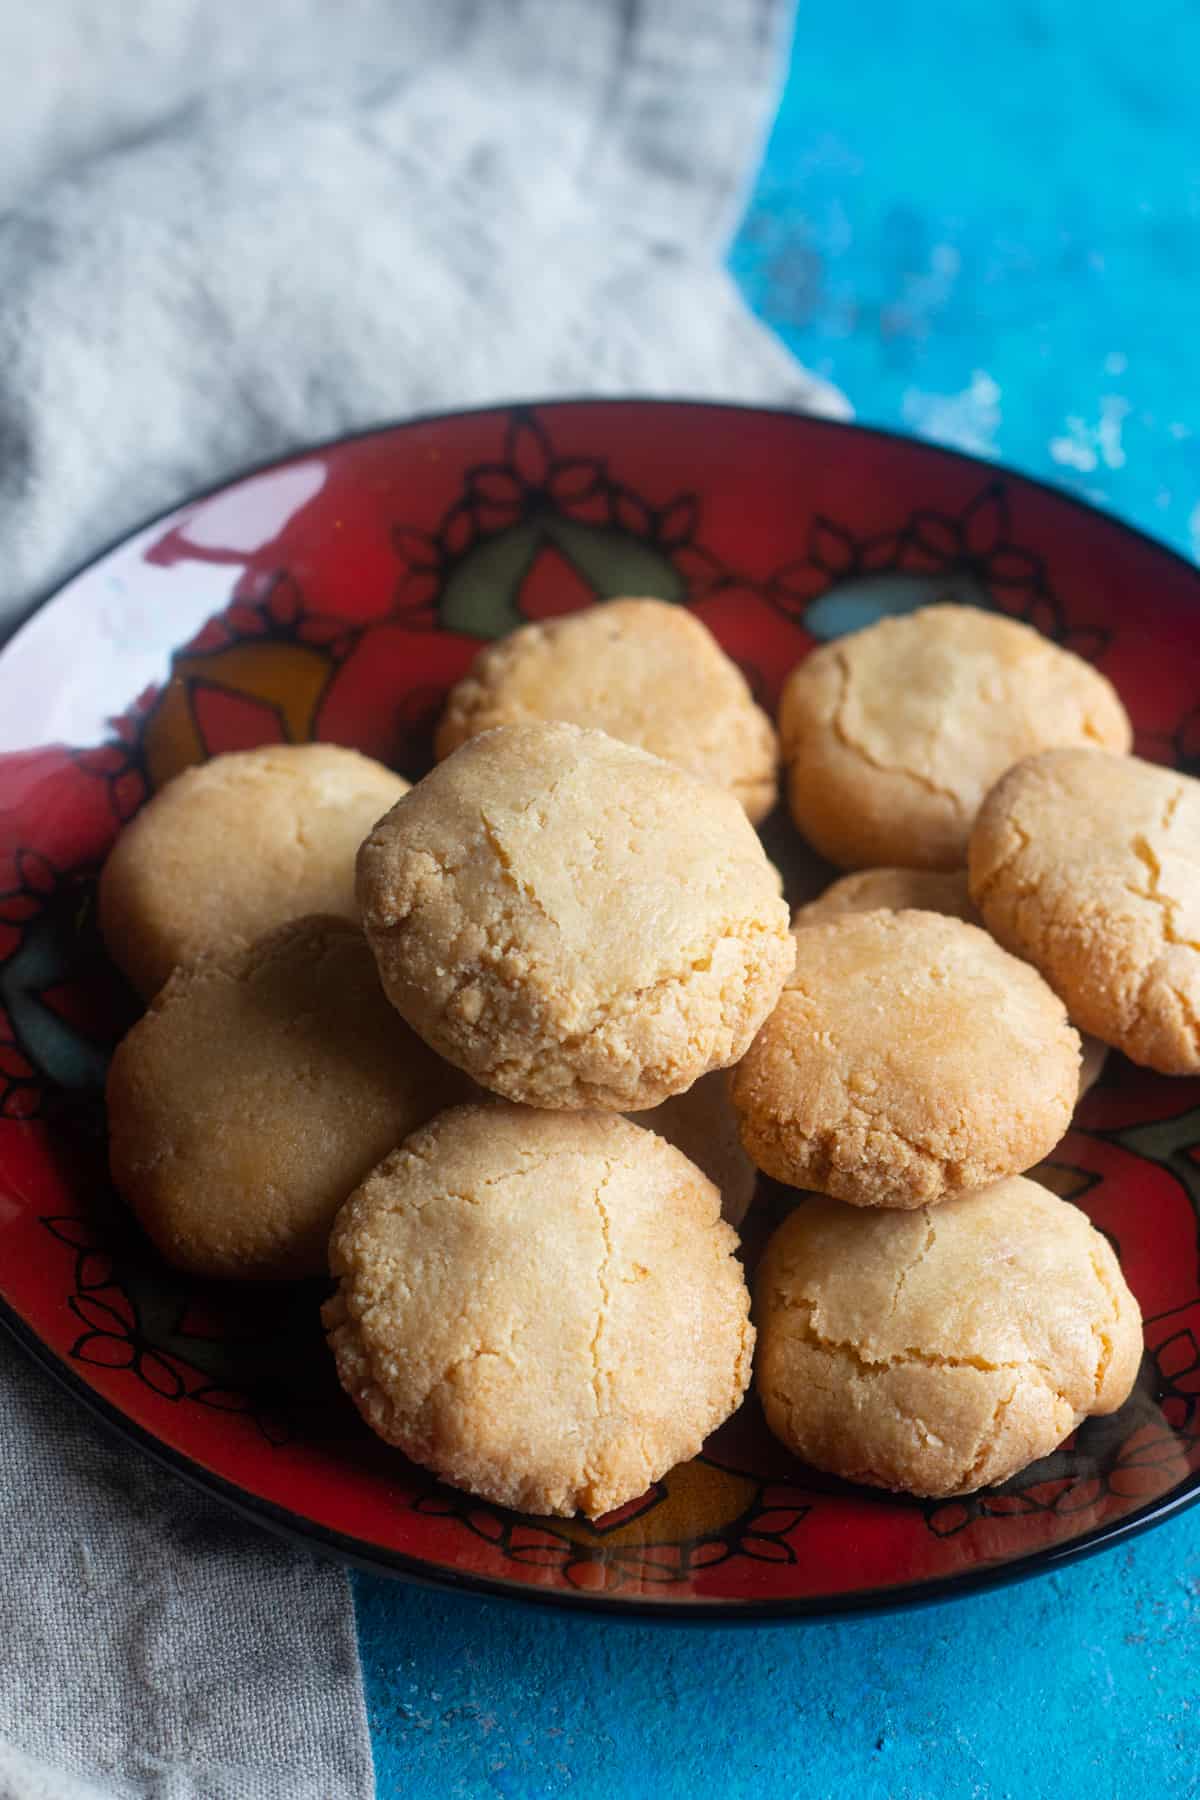 These Turkish almond cookies are chewy and very tasty. Learn how to make cookies with almond flour and just three additional ingredients. These cookies are gluten free and super tasty!
